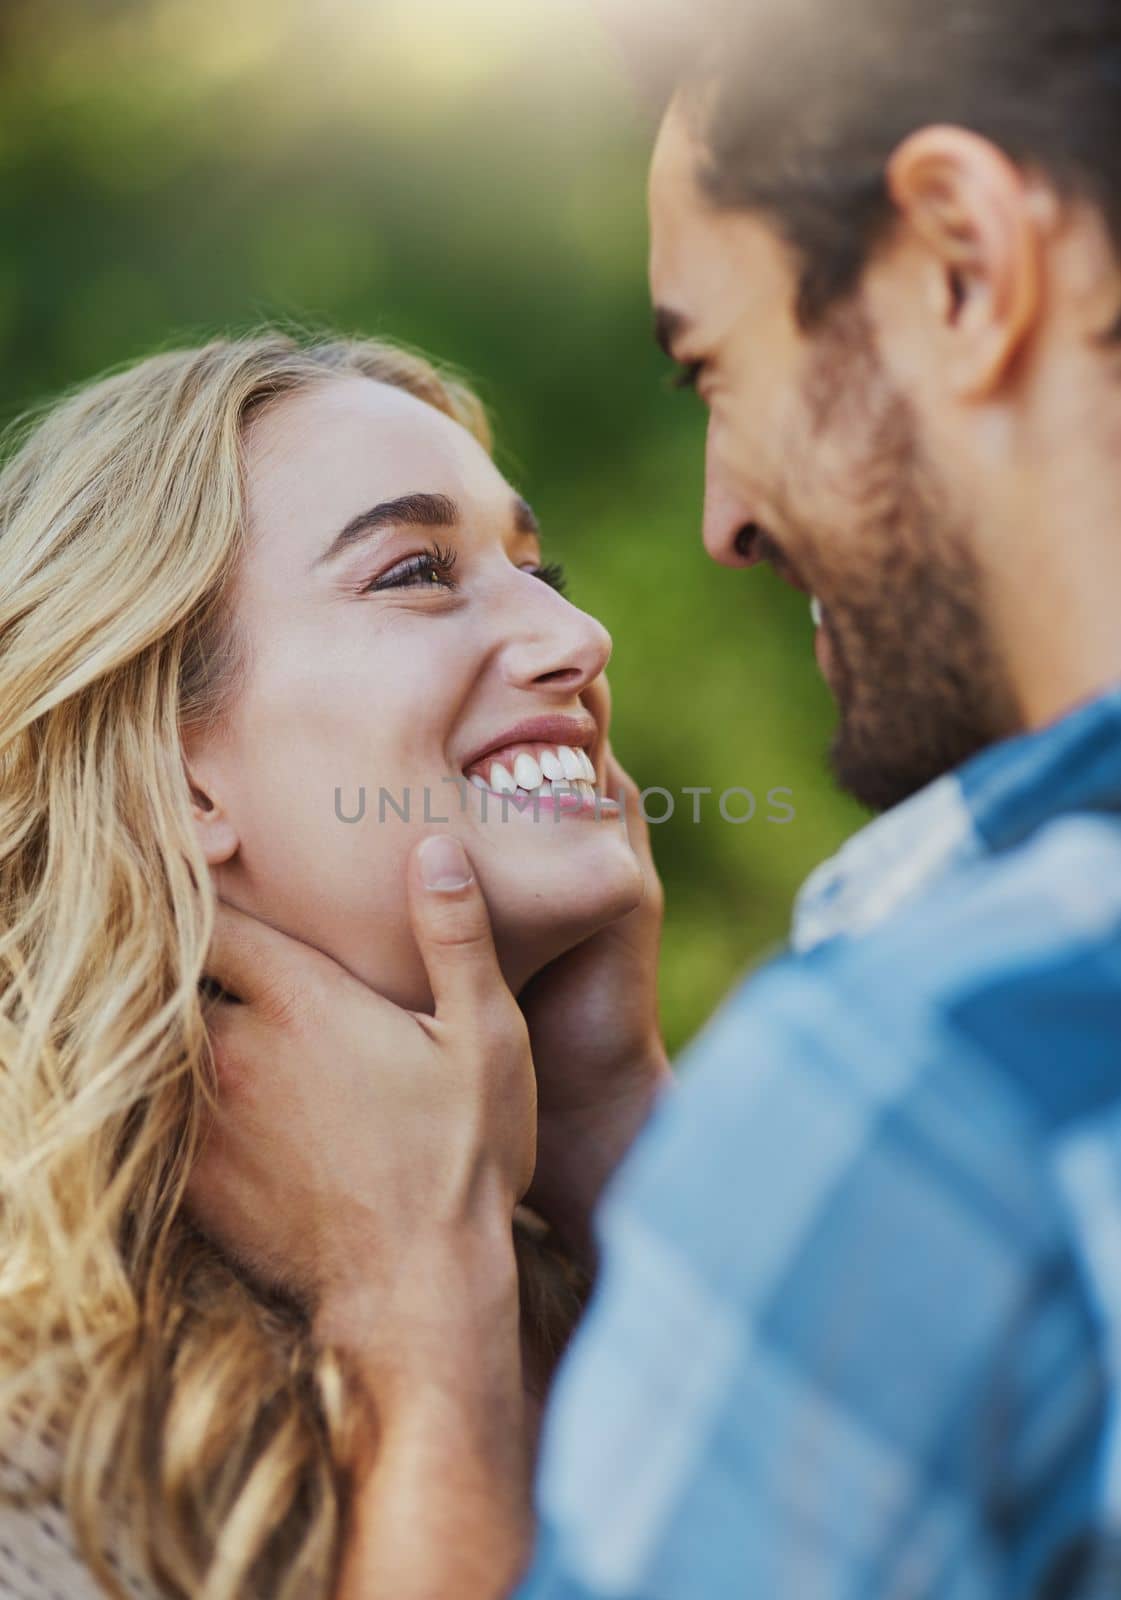 Hearts that love are happy. an affectionate young couple having a romantic moment outdoors